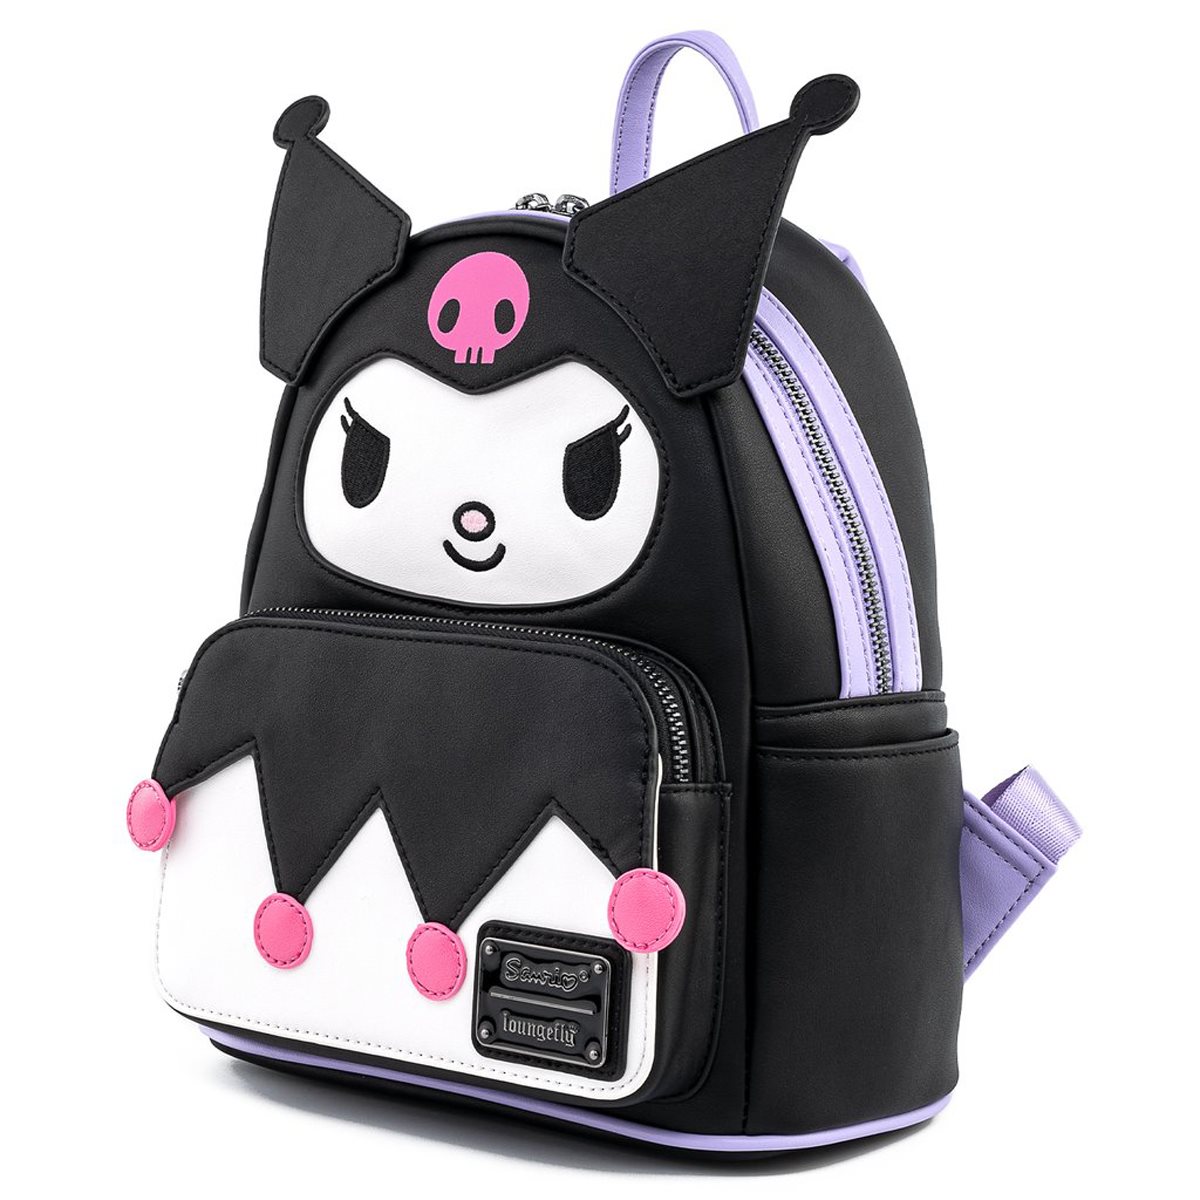 HELLO KITTY WITCH COSPLAY MINI BACKPACK - SANRIO